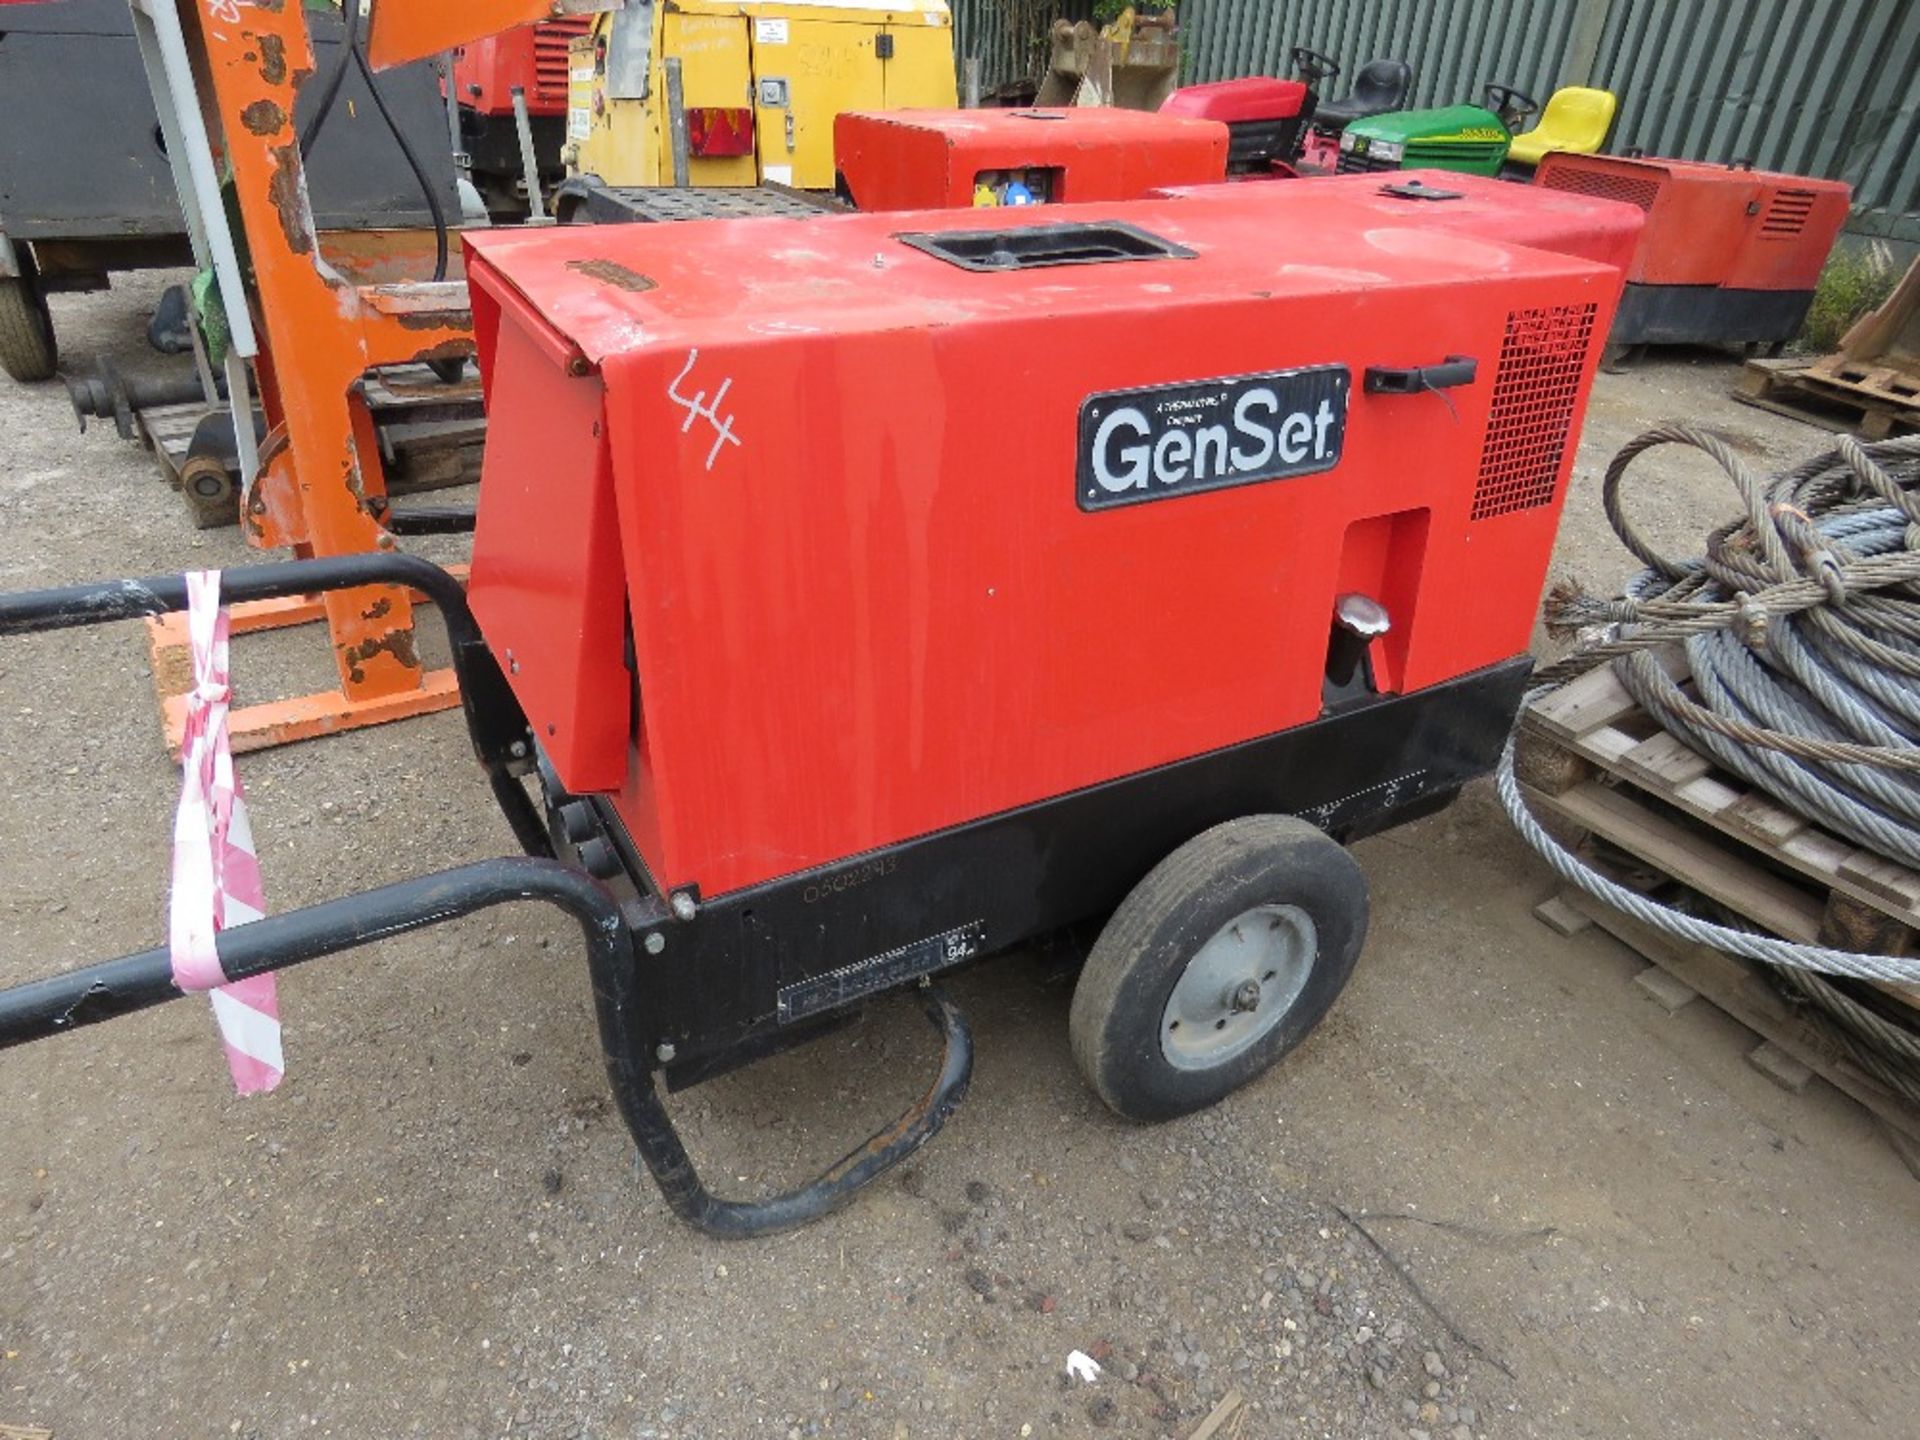 GENSET MPM 8/300 AMP WELDER GENERATOR. WHEN TESTED WAS SEEN TO TURN OVER BUT NOT START